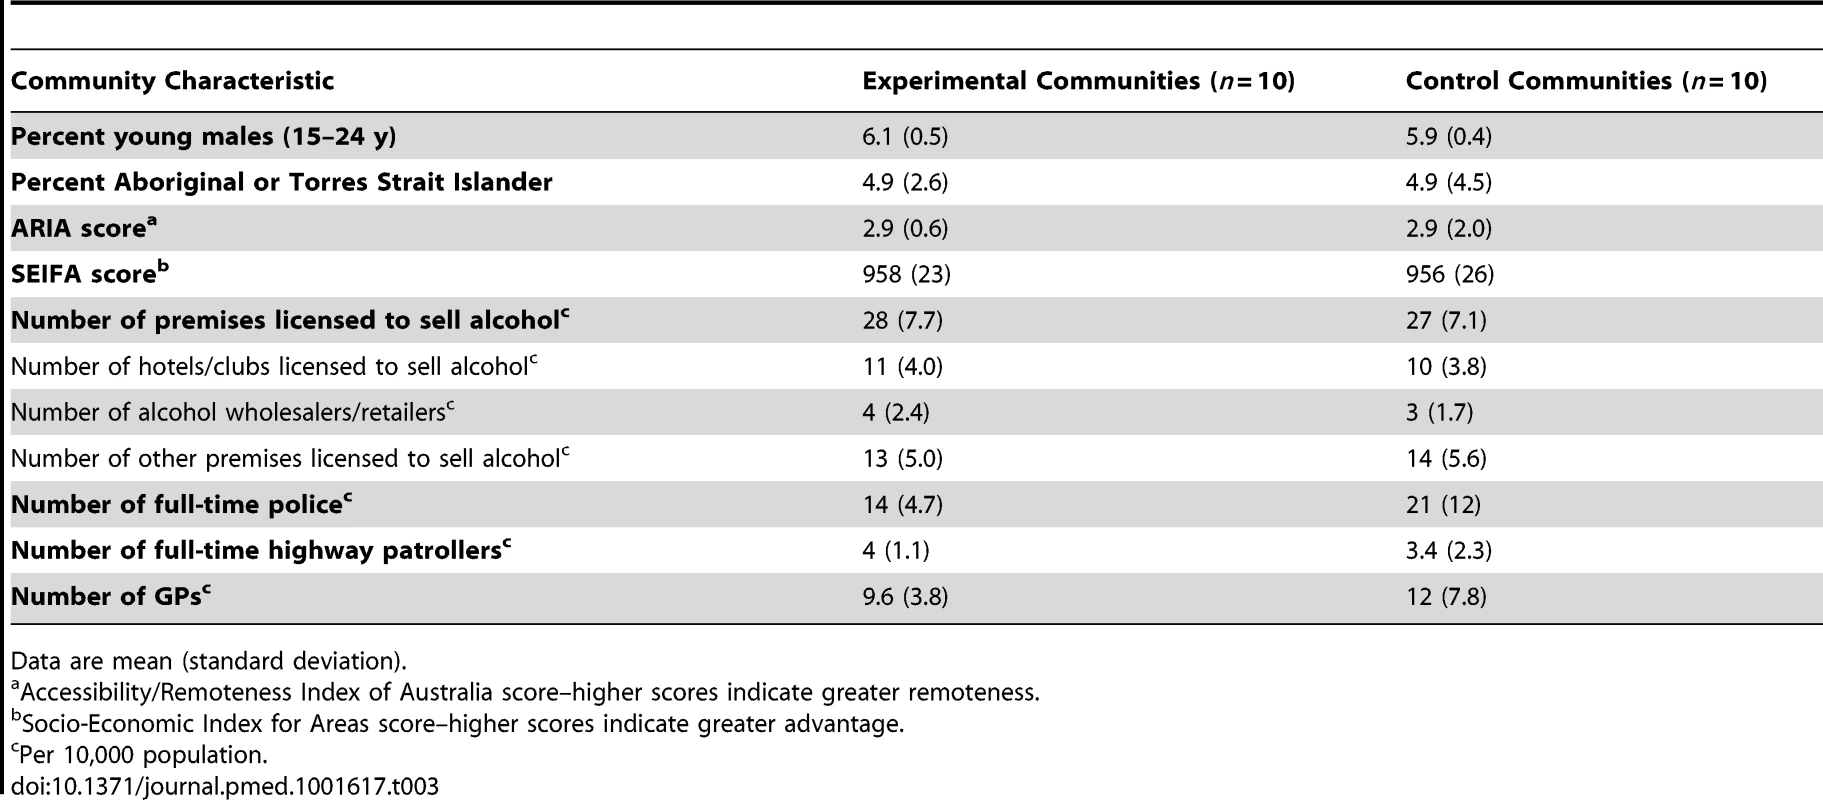 Community-level summary statistics pre-intervention, separately for experimental and control communities.